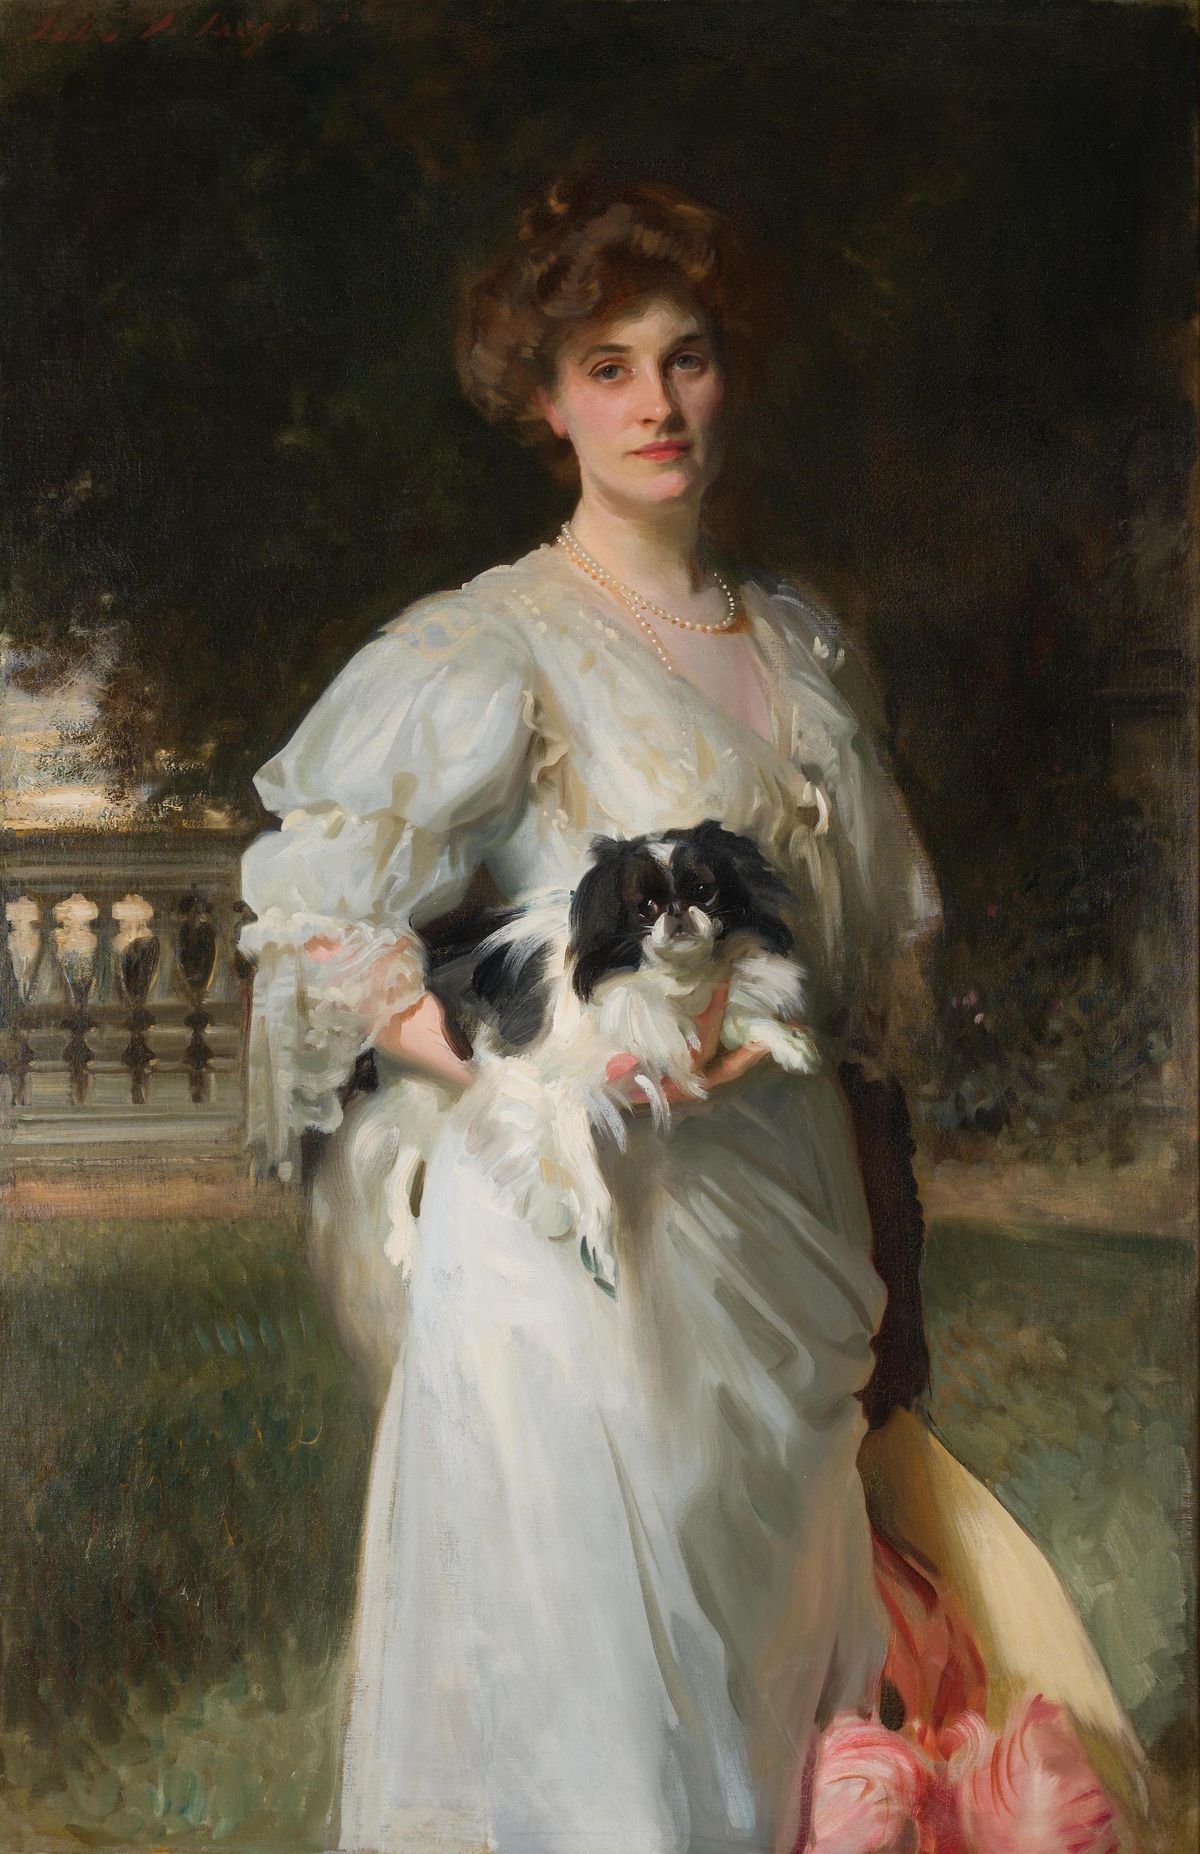 John Singer Sargent, Portrait of Mrs. Frederick Guest (Amy Phipps), 1905 Courtesy the Norton Museum of Art, gift of Alexander M. D. C. Guest and Family, grandson of Amy Phipps Guest